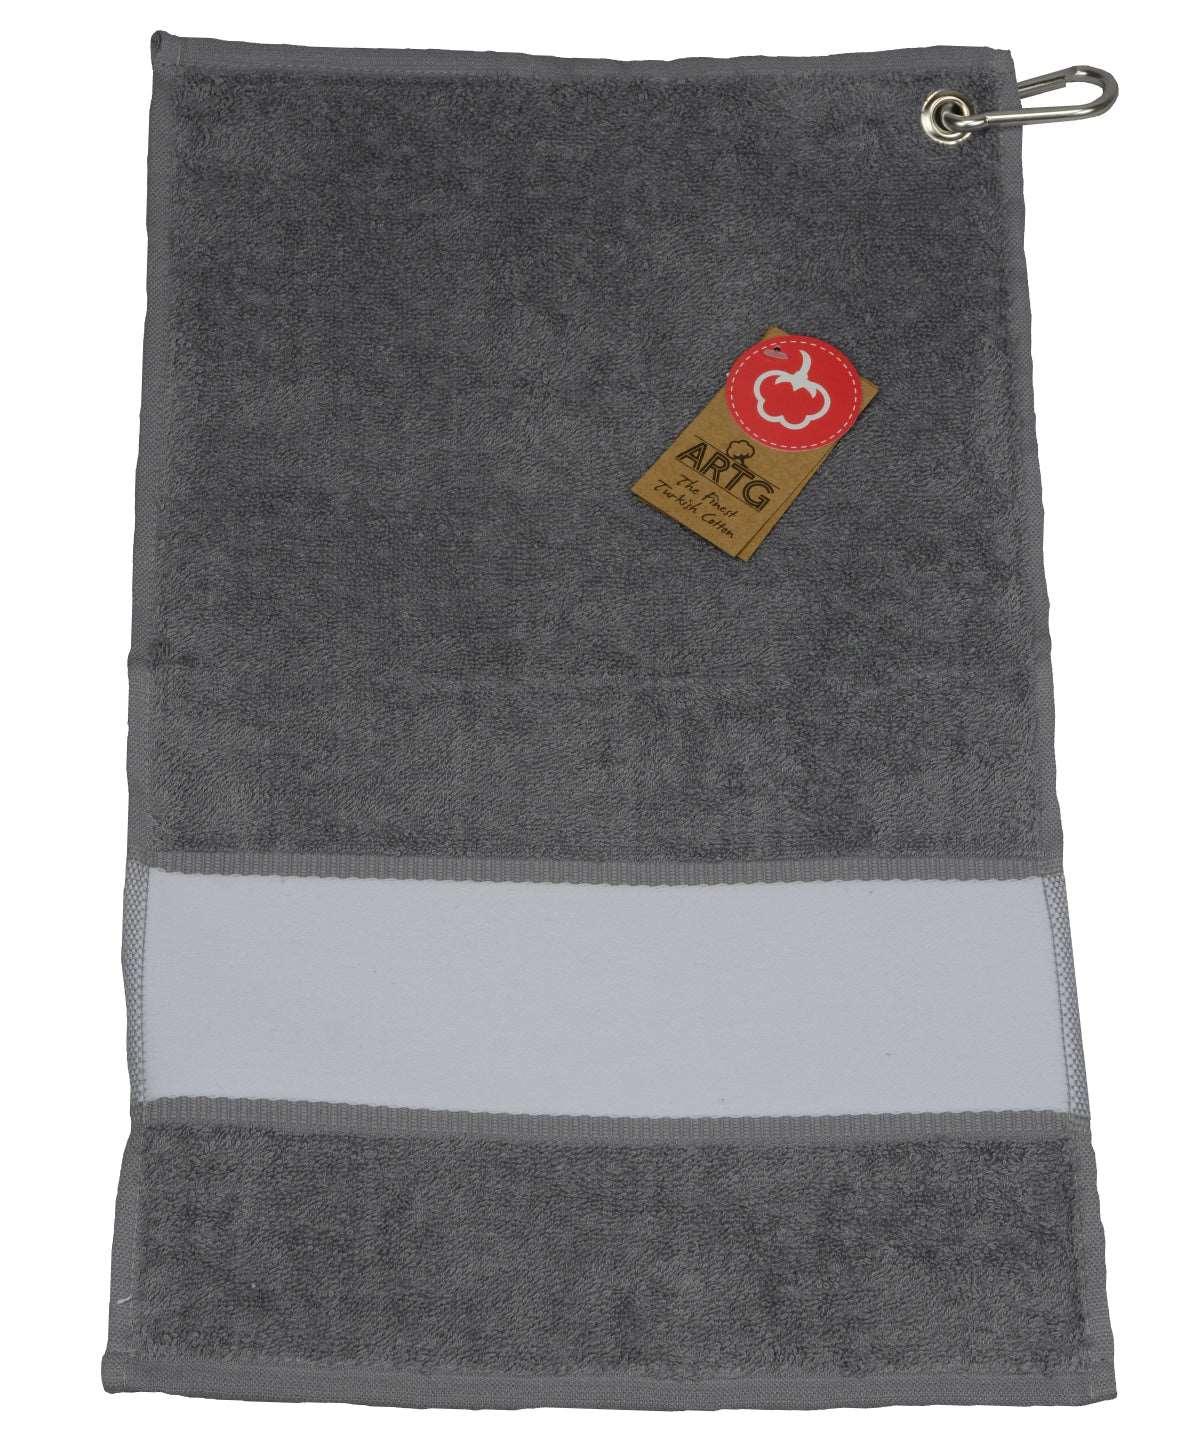 Anthracite Grey - ARTG® SUBLI-Me® golf towel Towels A&R Towels Homewares & Towelling, New For 2021, New Products – February Launch, New Styles For 2021, Rebrandable Schoolwear Centres